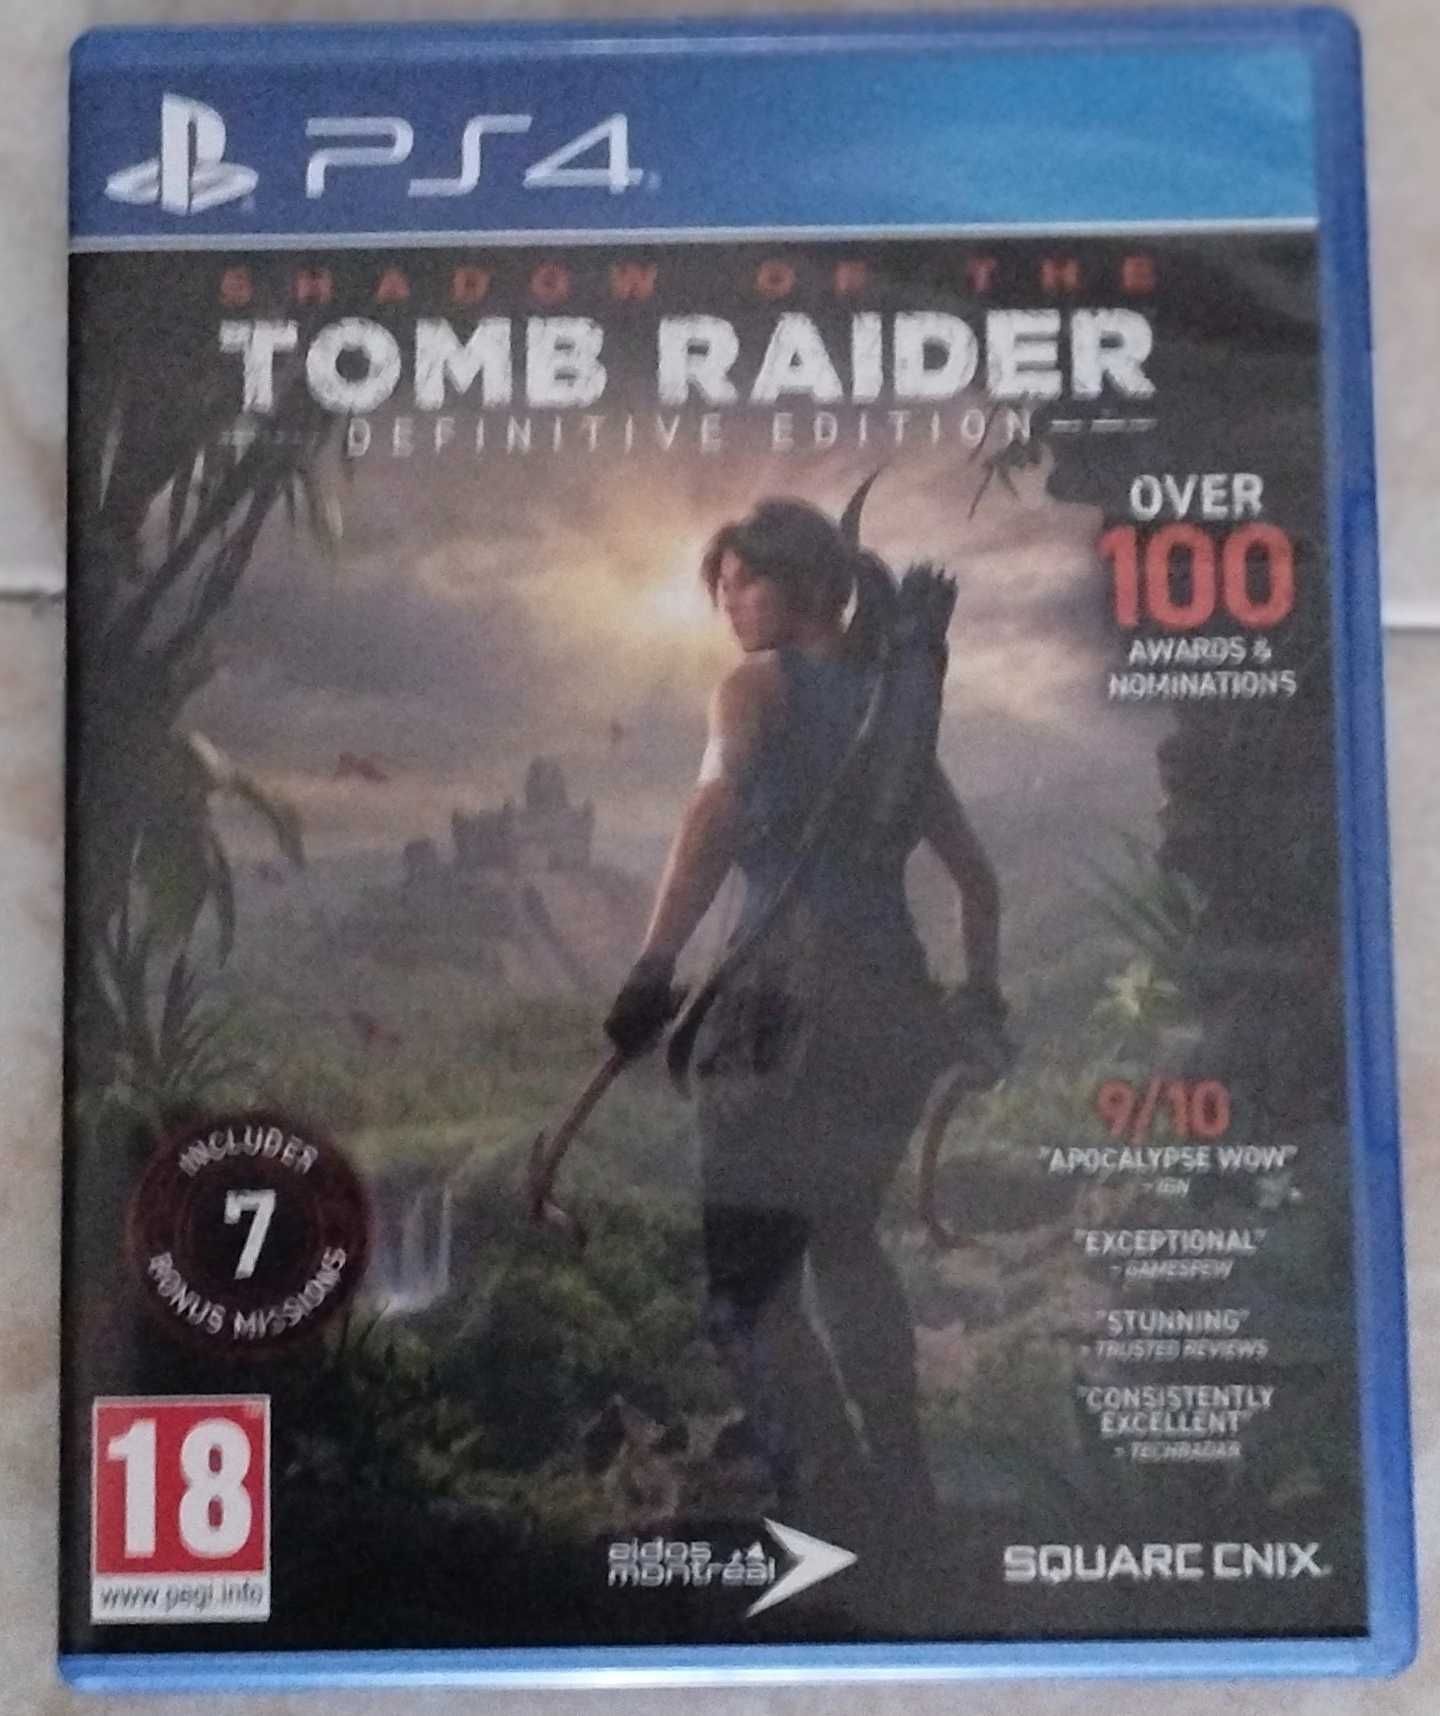 Shadow of tomb Raider ps4